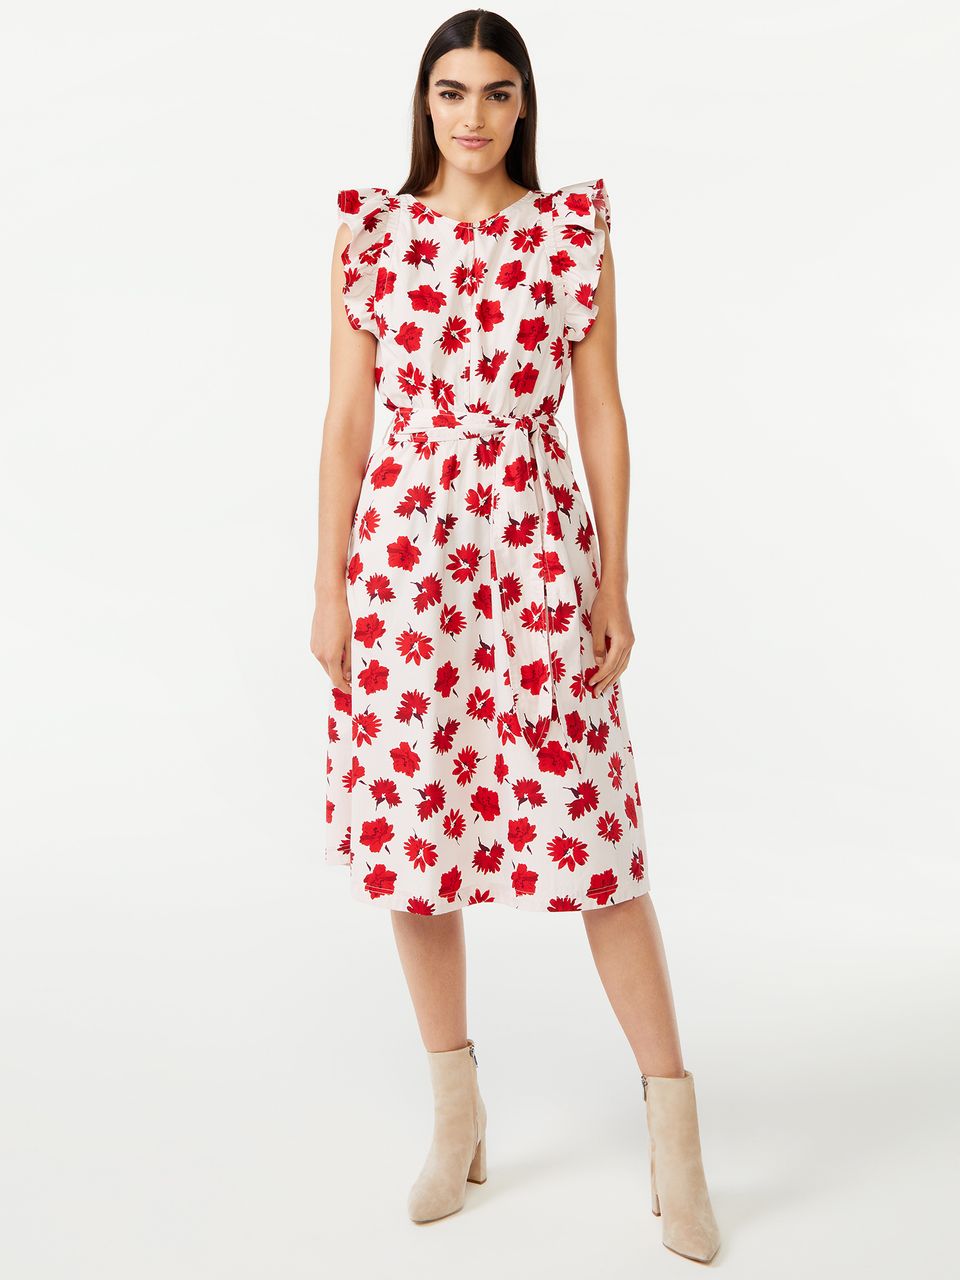 A ruffled frock with an irresistible print